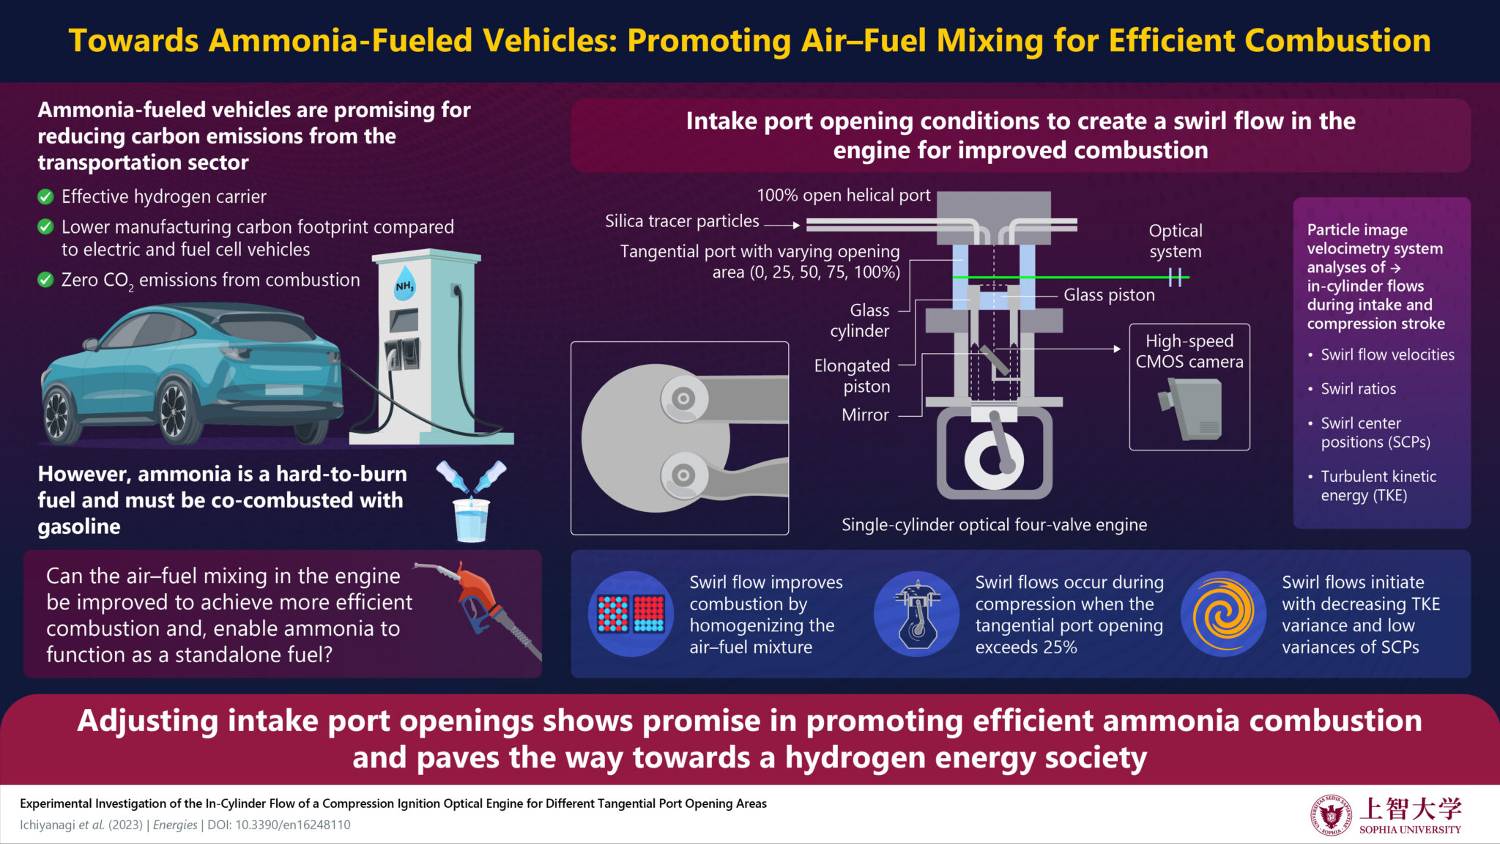 Swirling flows, initiated when the tangential port opening exceeds 25%, have the potential to enhance the mixing of air and fuel. This can result in a more homogeneous mixture, leading to improved combustion efficiency and reduced emissions.